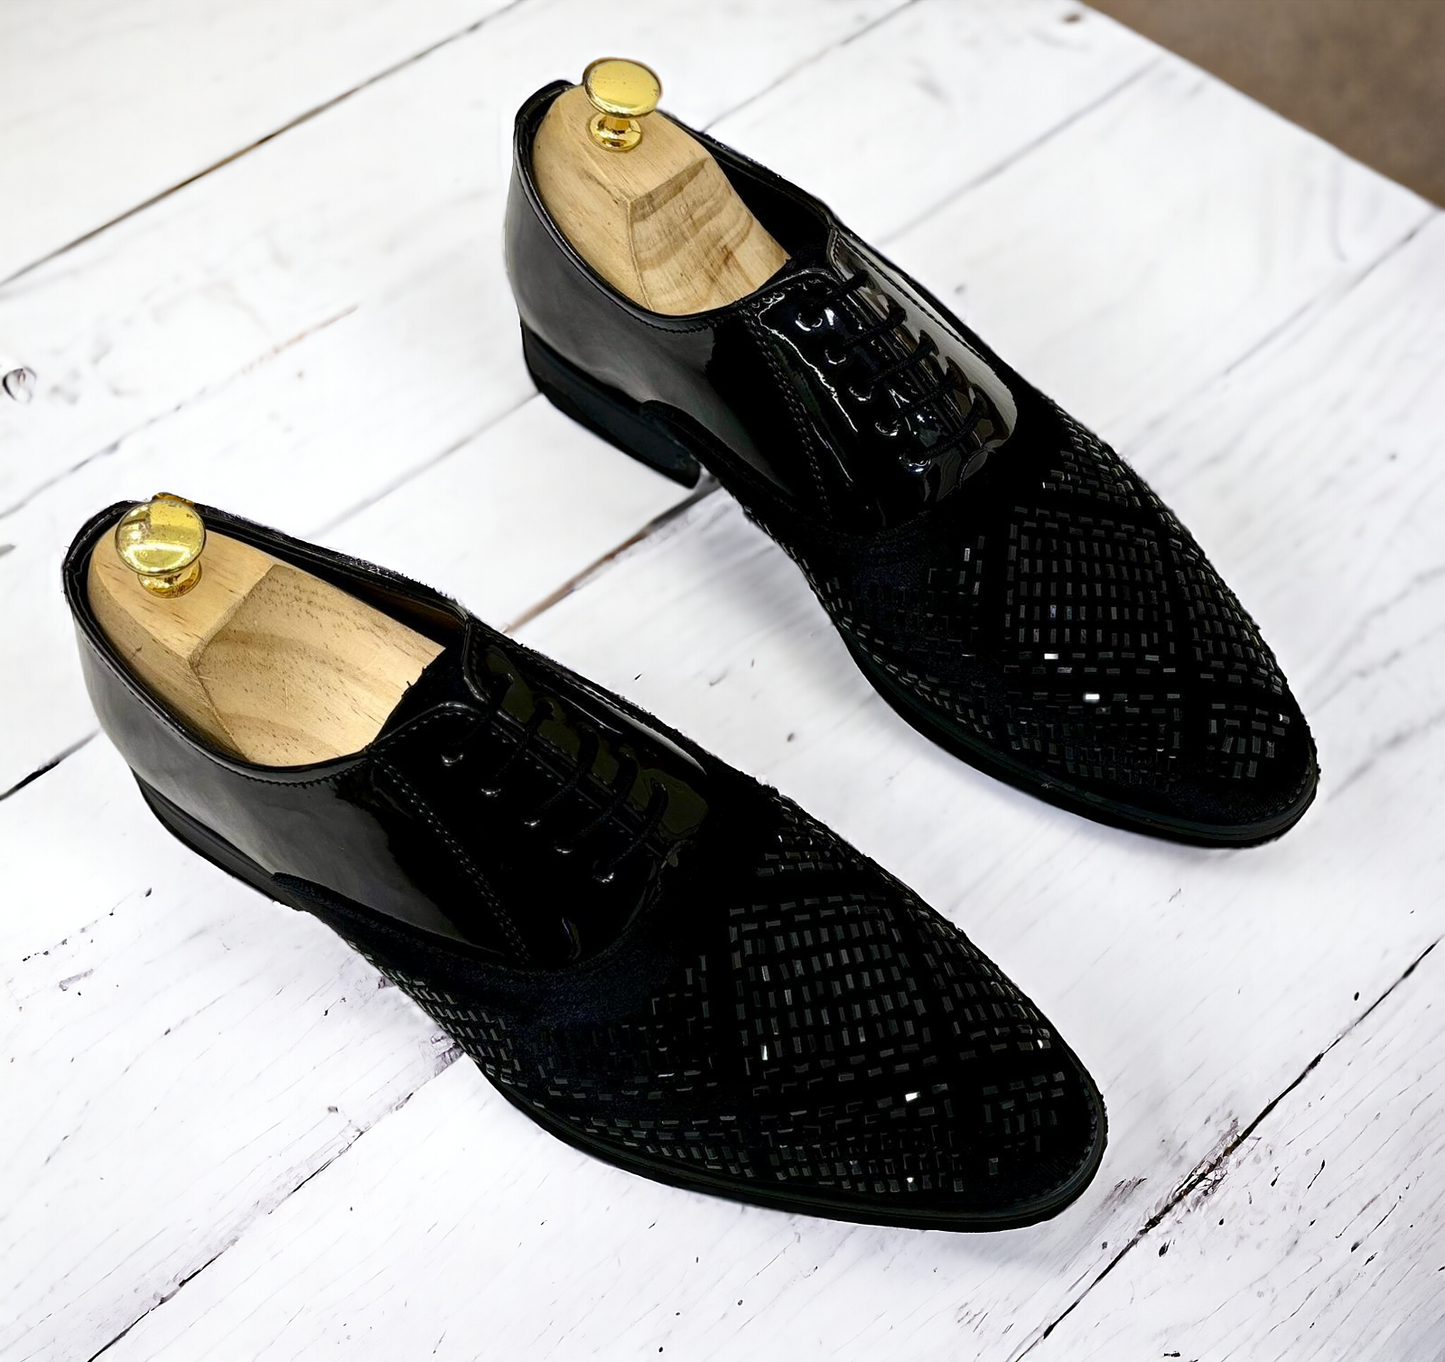 Jack Marc Fashion Rhinestone Lace-up Shoes for Men Party and Casual Wear